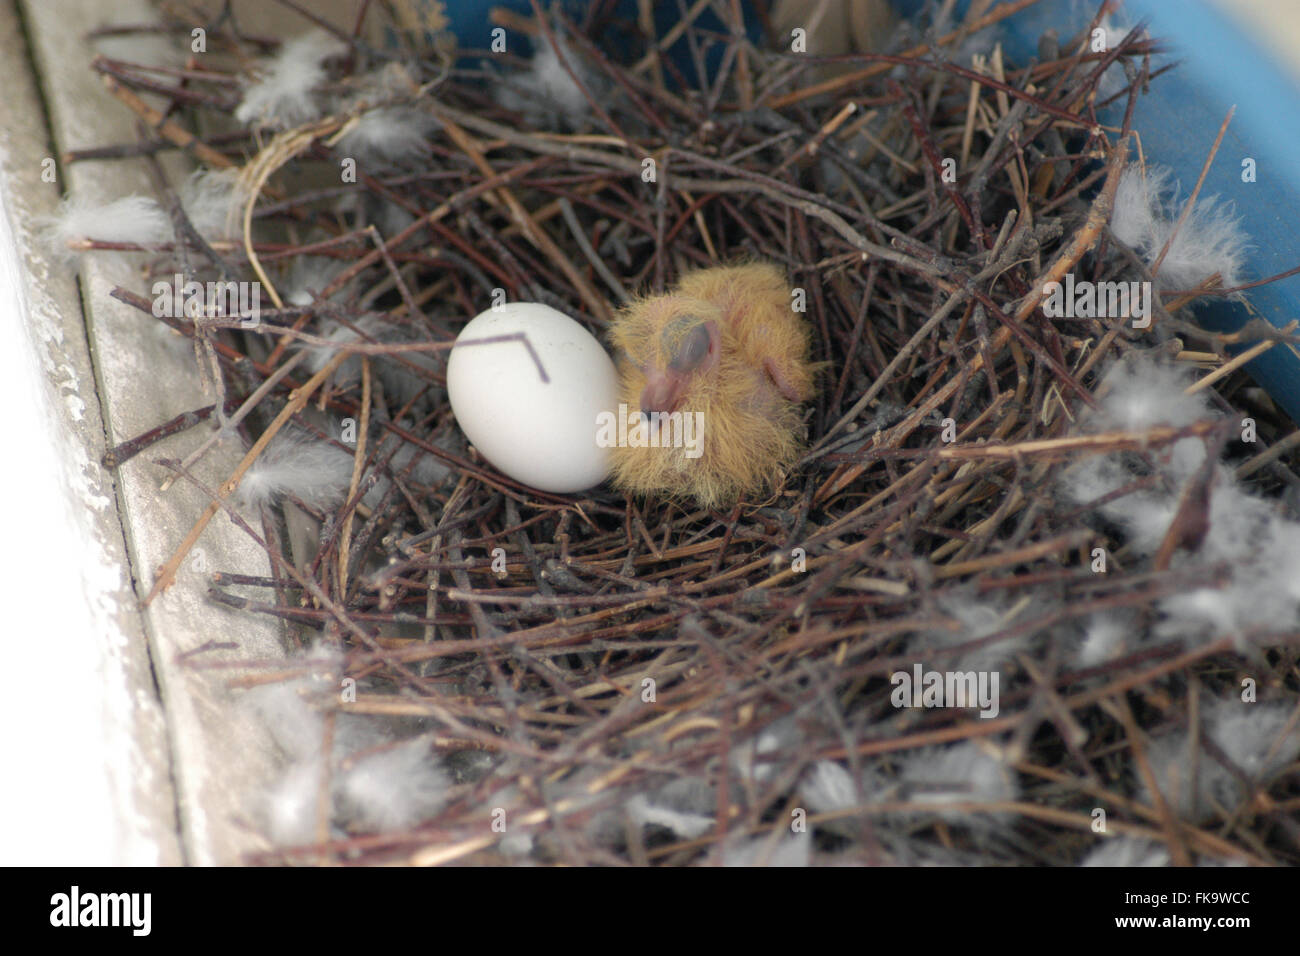 Newly hatched squab of the rock pigeon (Columba livia) sitting next to the pigeon egg in the nest on an urban balcony in Prague, Czech Republic. The nest is pictured few hours after the squab hatched out. Stock Photo